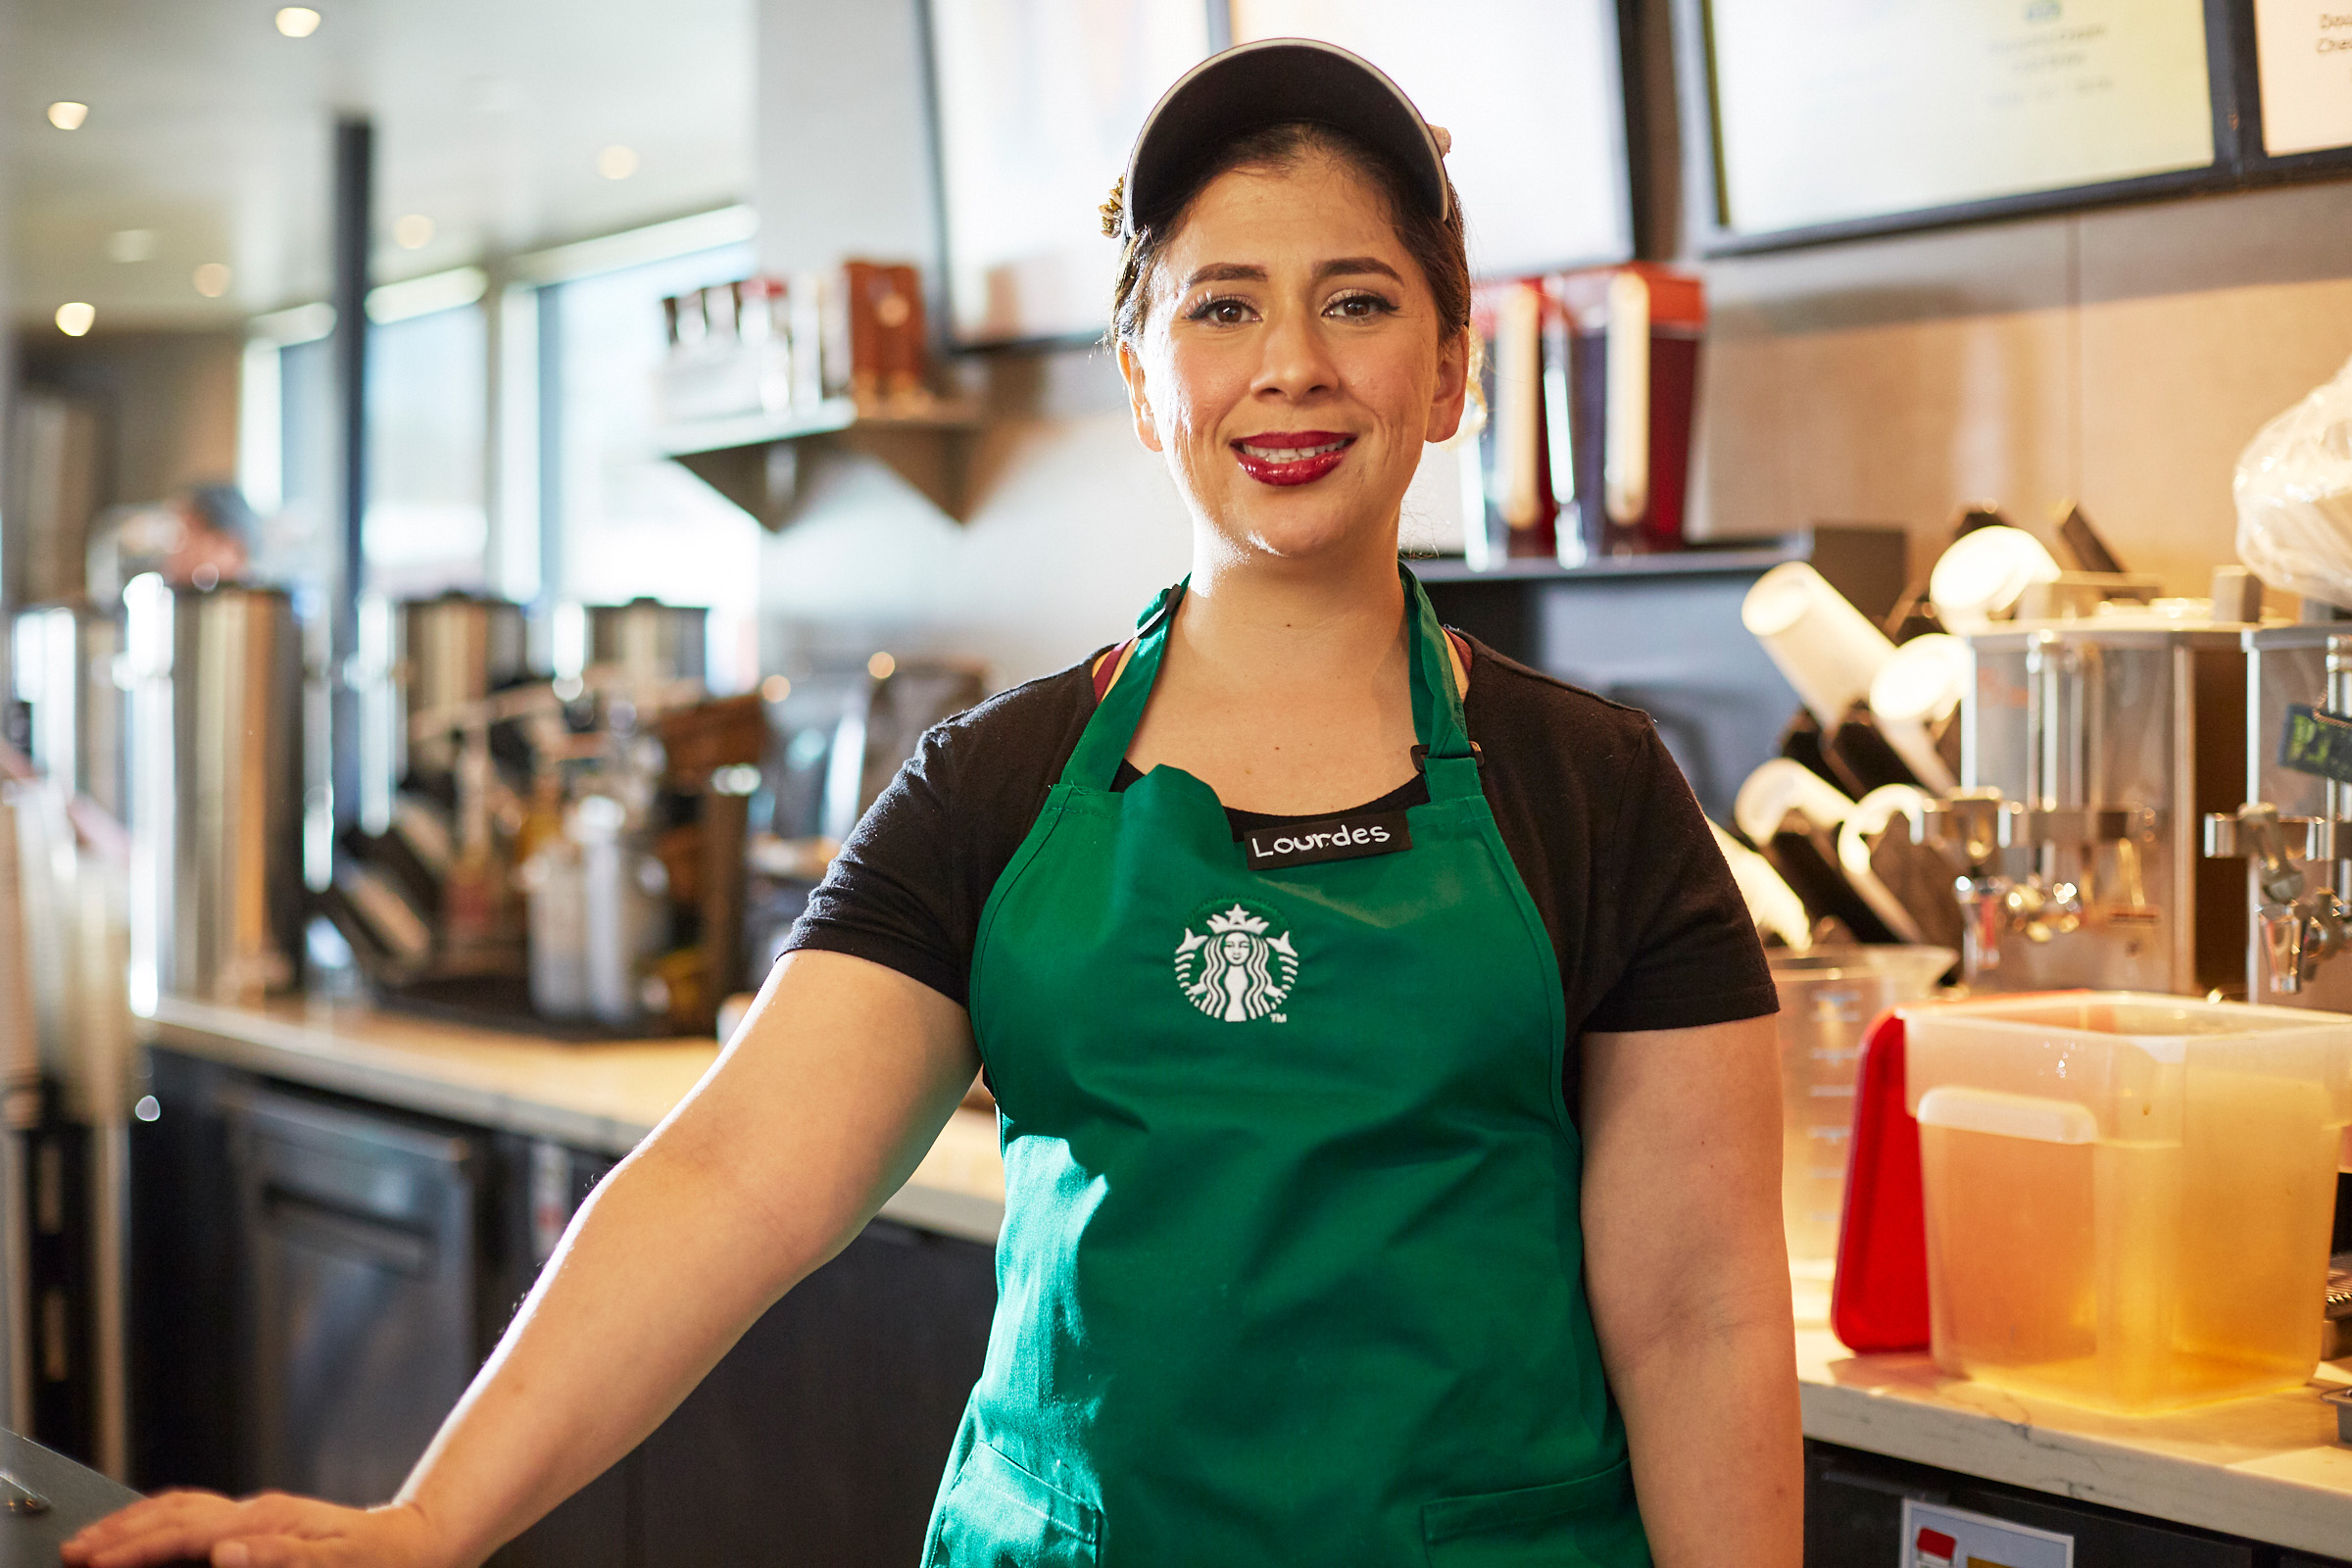 A person wearing a green apron and Starbucks visor smiles at the camera.